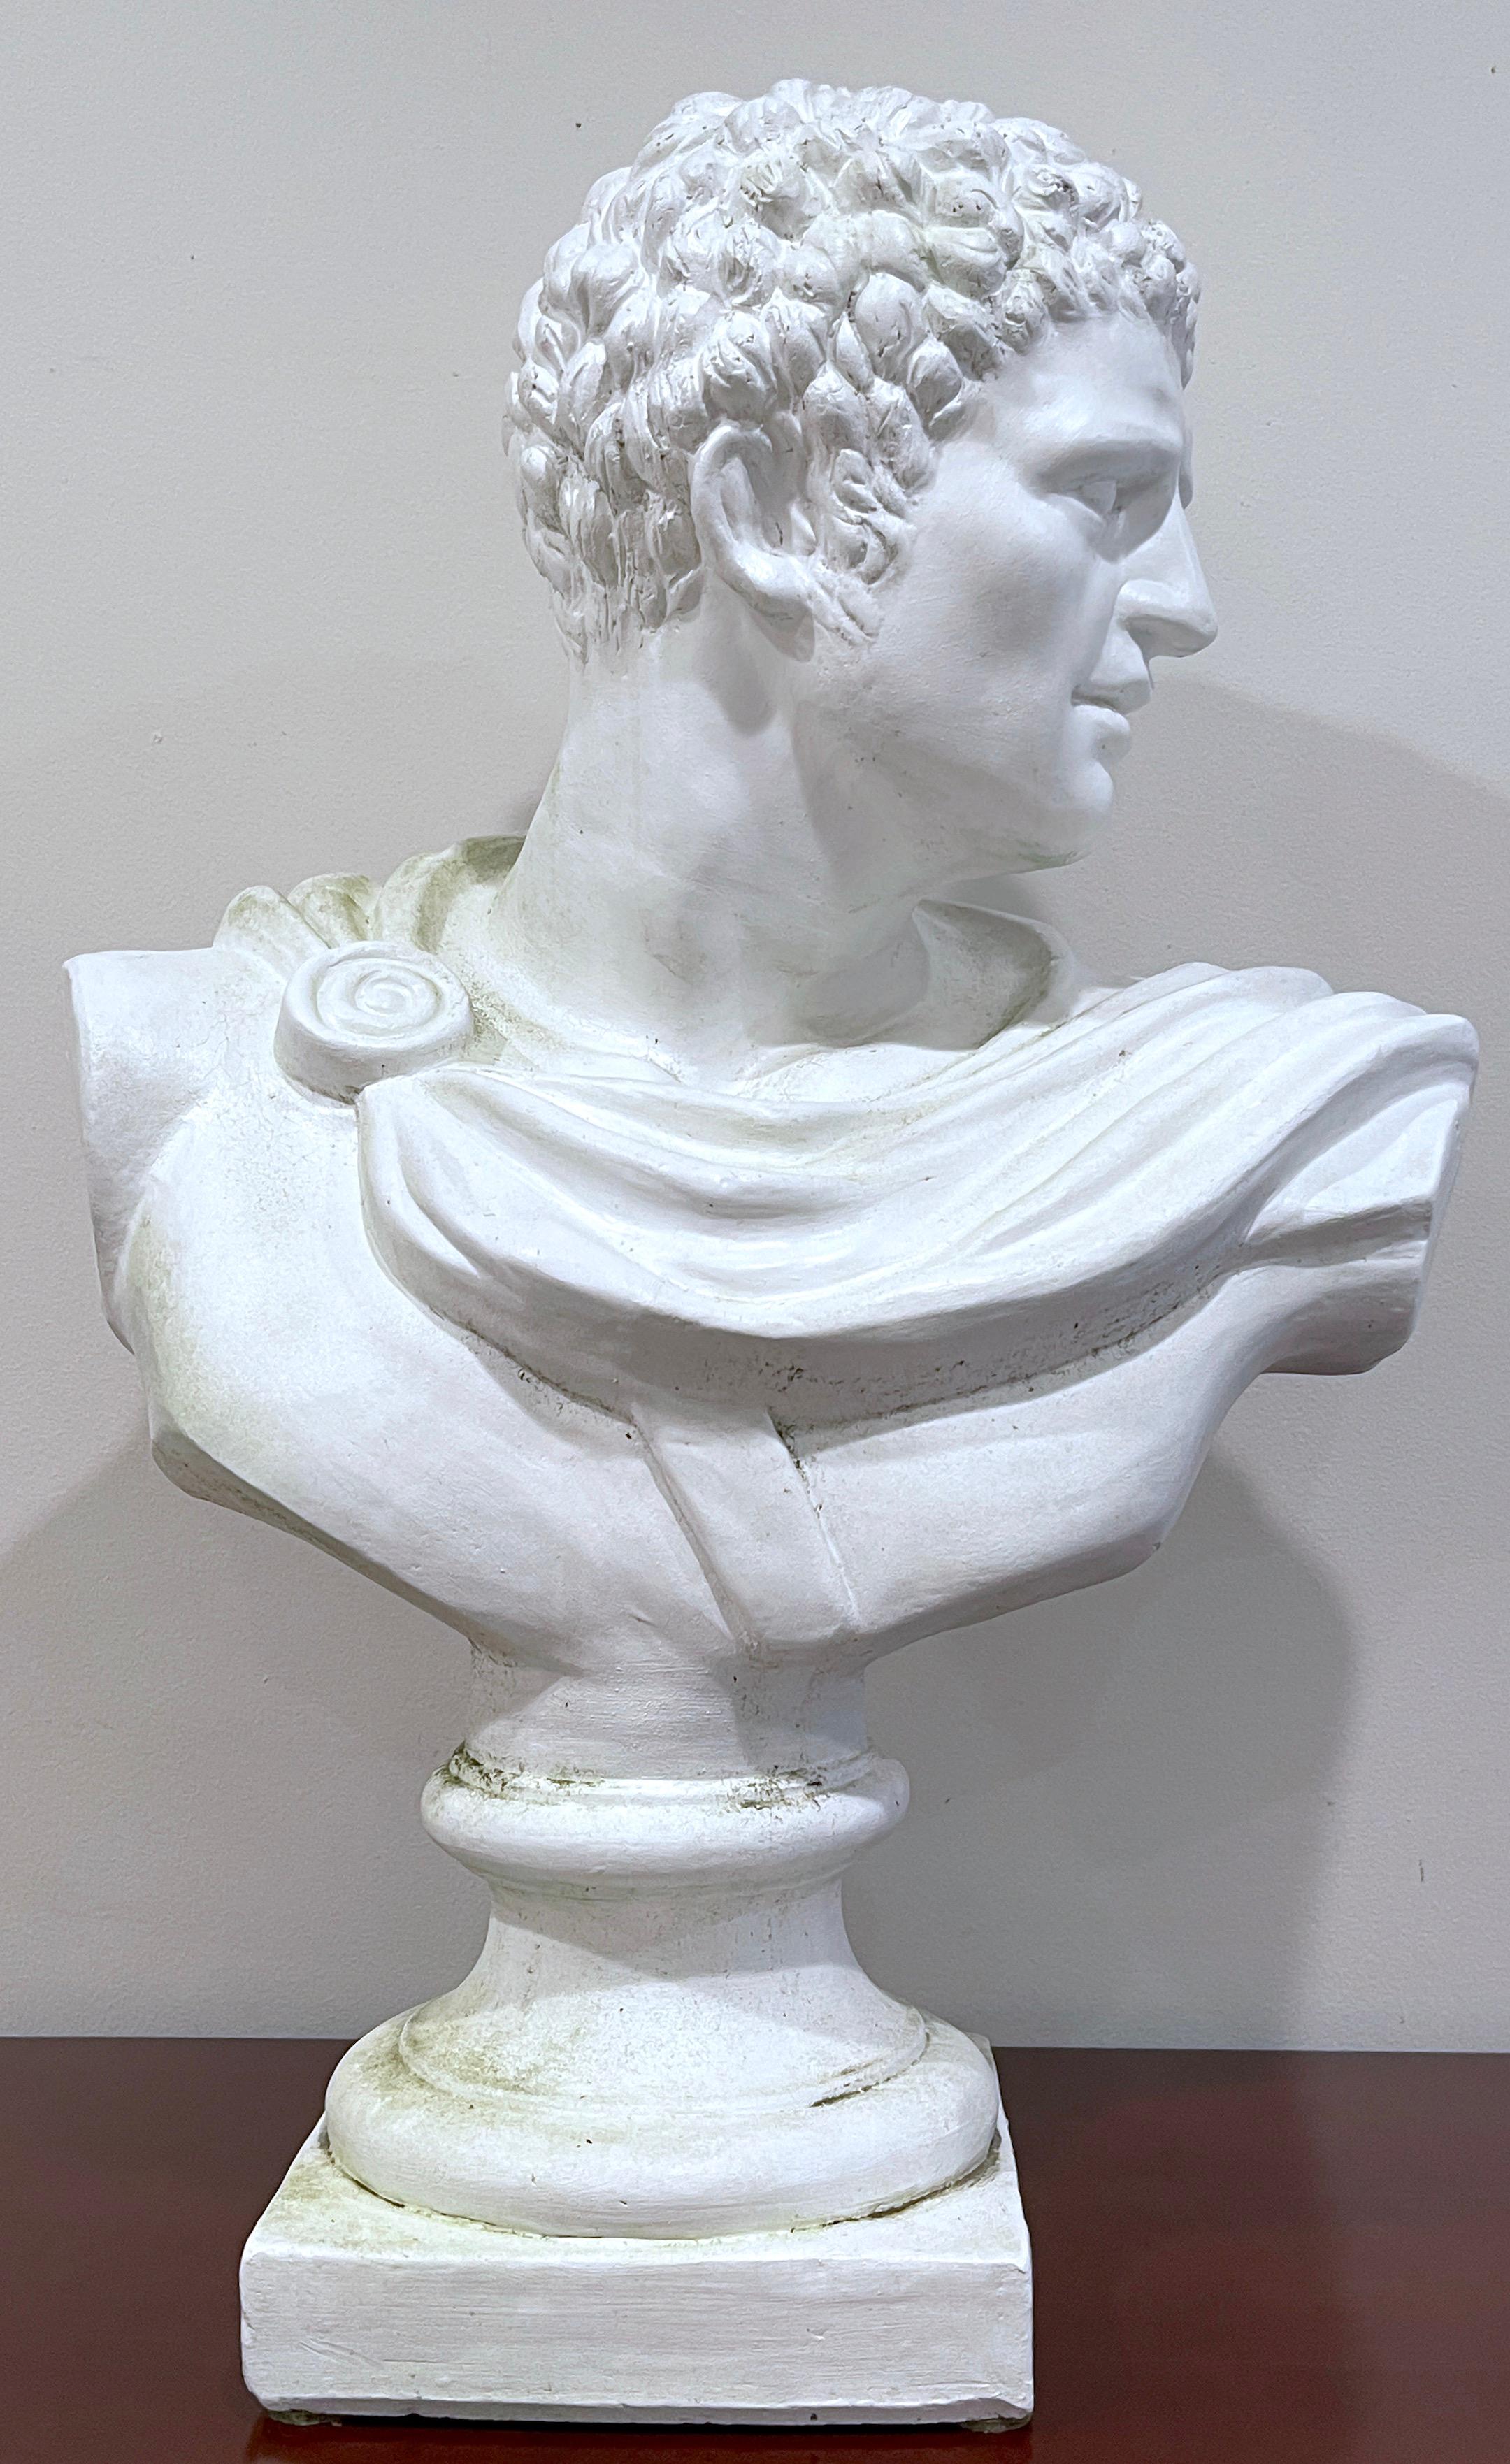 Italian White Terracotta bust of the Roman Emperor, Caesar Augustus, Octavian 
Italy, 1900s, Can be used indoors or outdoors.

A well execututed, large scale bust in terracotta, previously polychromed/ painted in white. This bust has been used